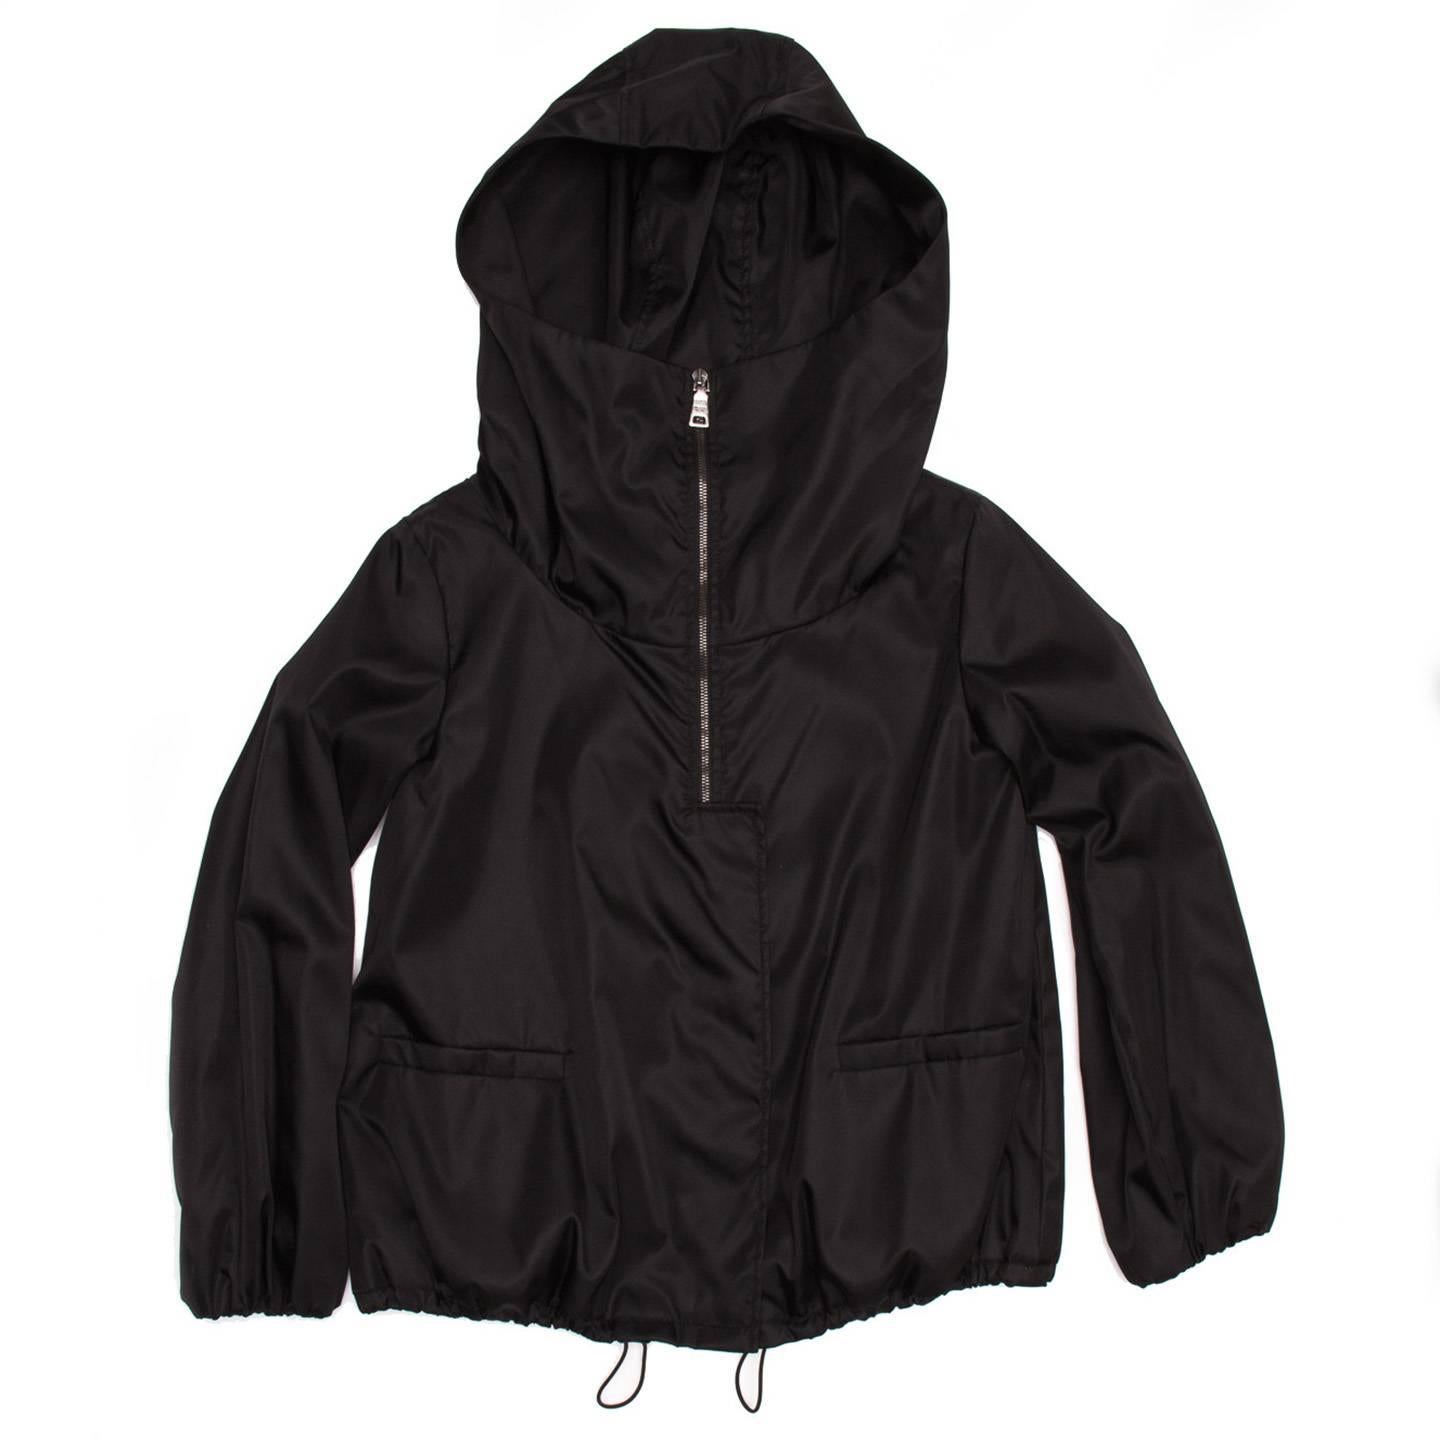 Elegant black windbreaker short jacket slightly padded, with high neck and hood. The front opens with a black metal zipper which is covered by a flap that fastens with hidden metal snap buttons. The sleeves are straight and the cuffs gathered, two